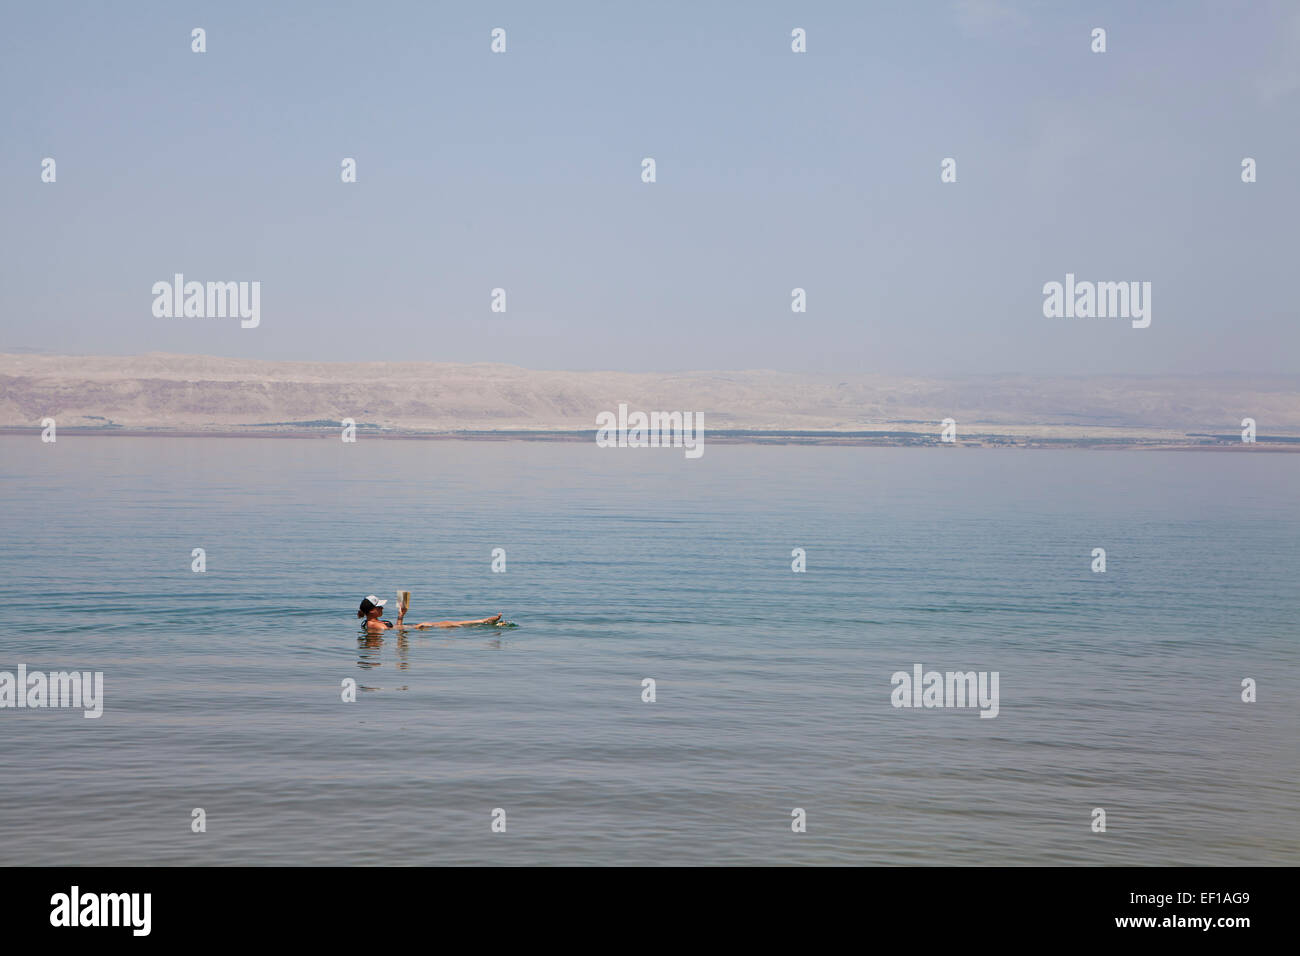 Relaxing in the dead sea. Stock Photo